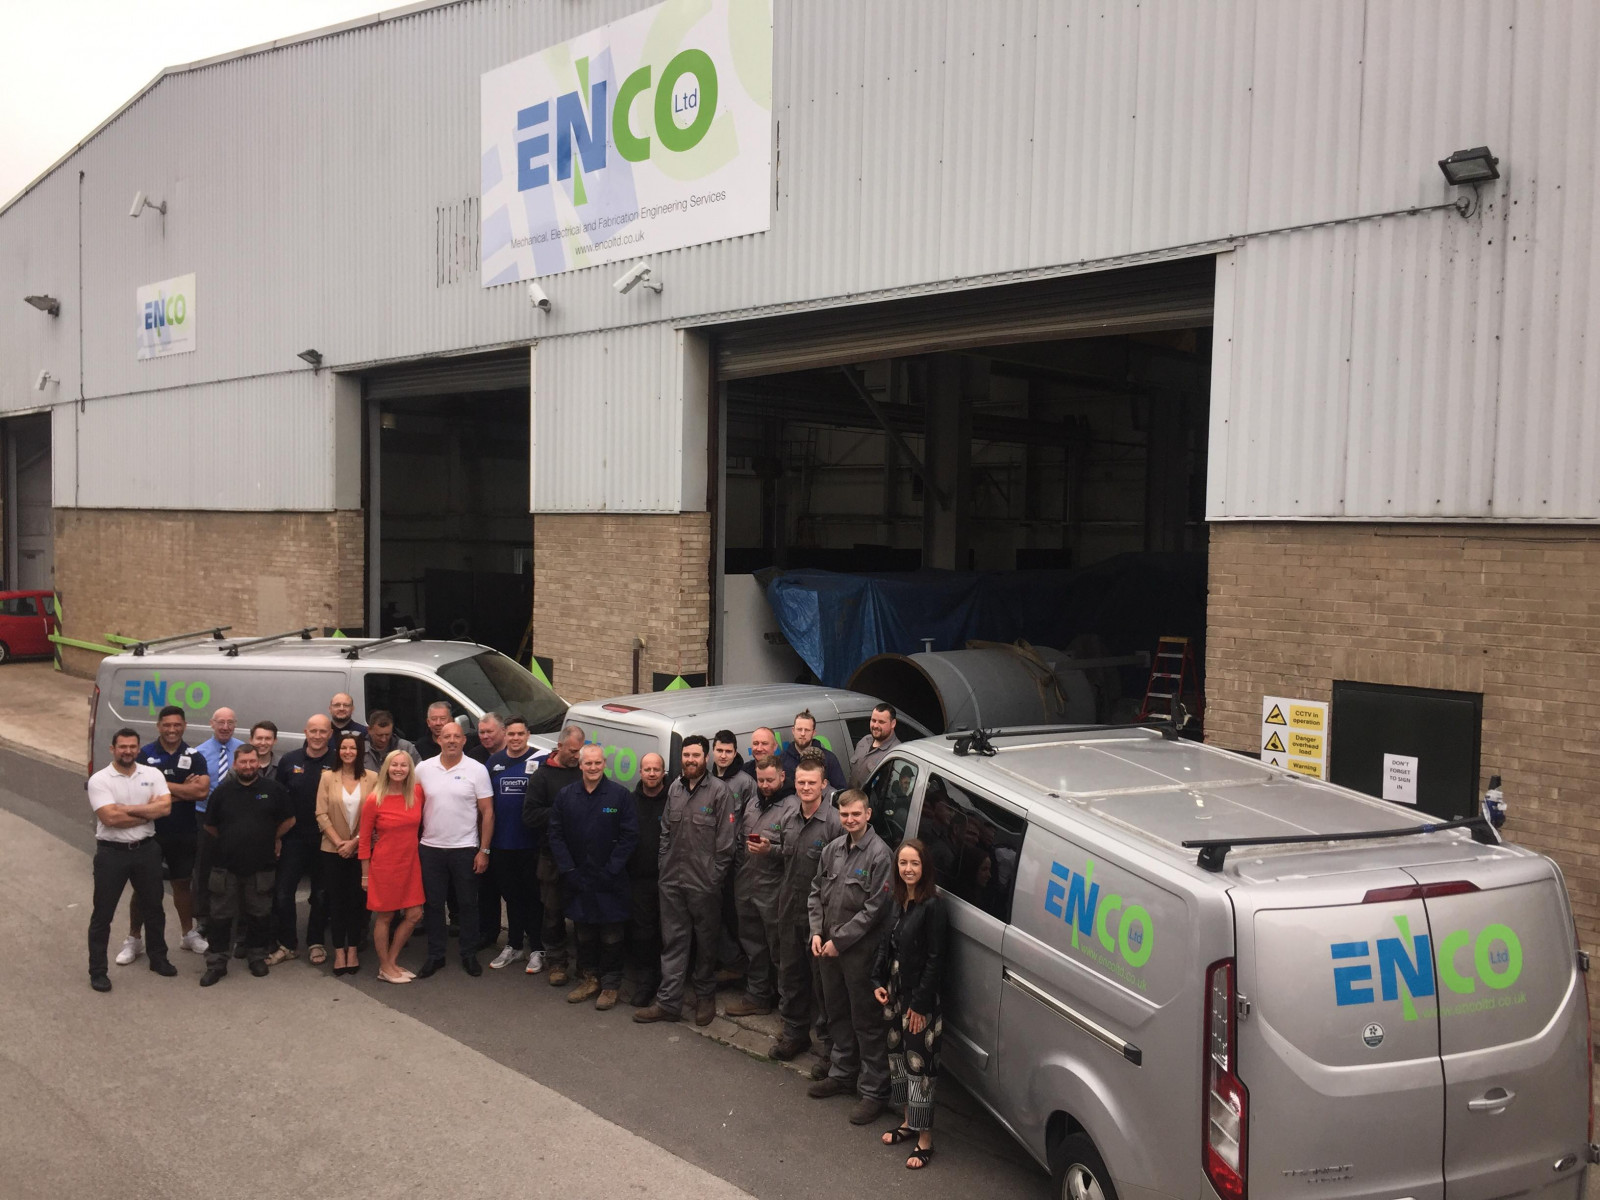 ENCO Continue to Support the Industry Through Expanding Both Their Workforce and Premises